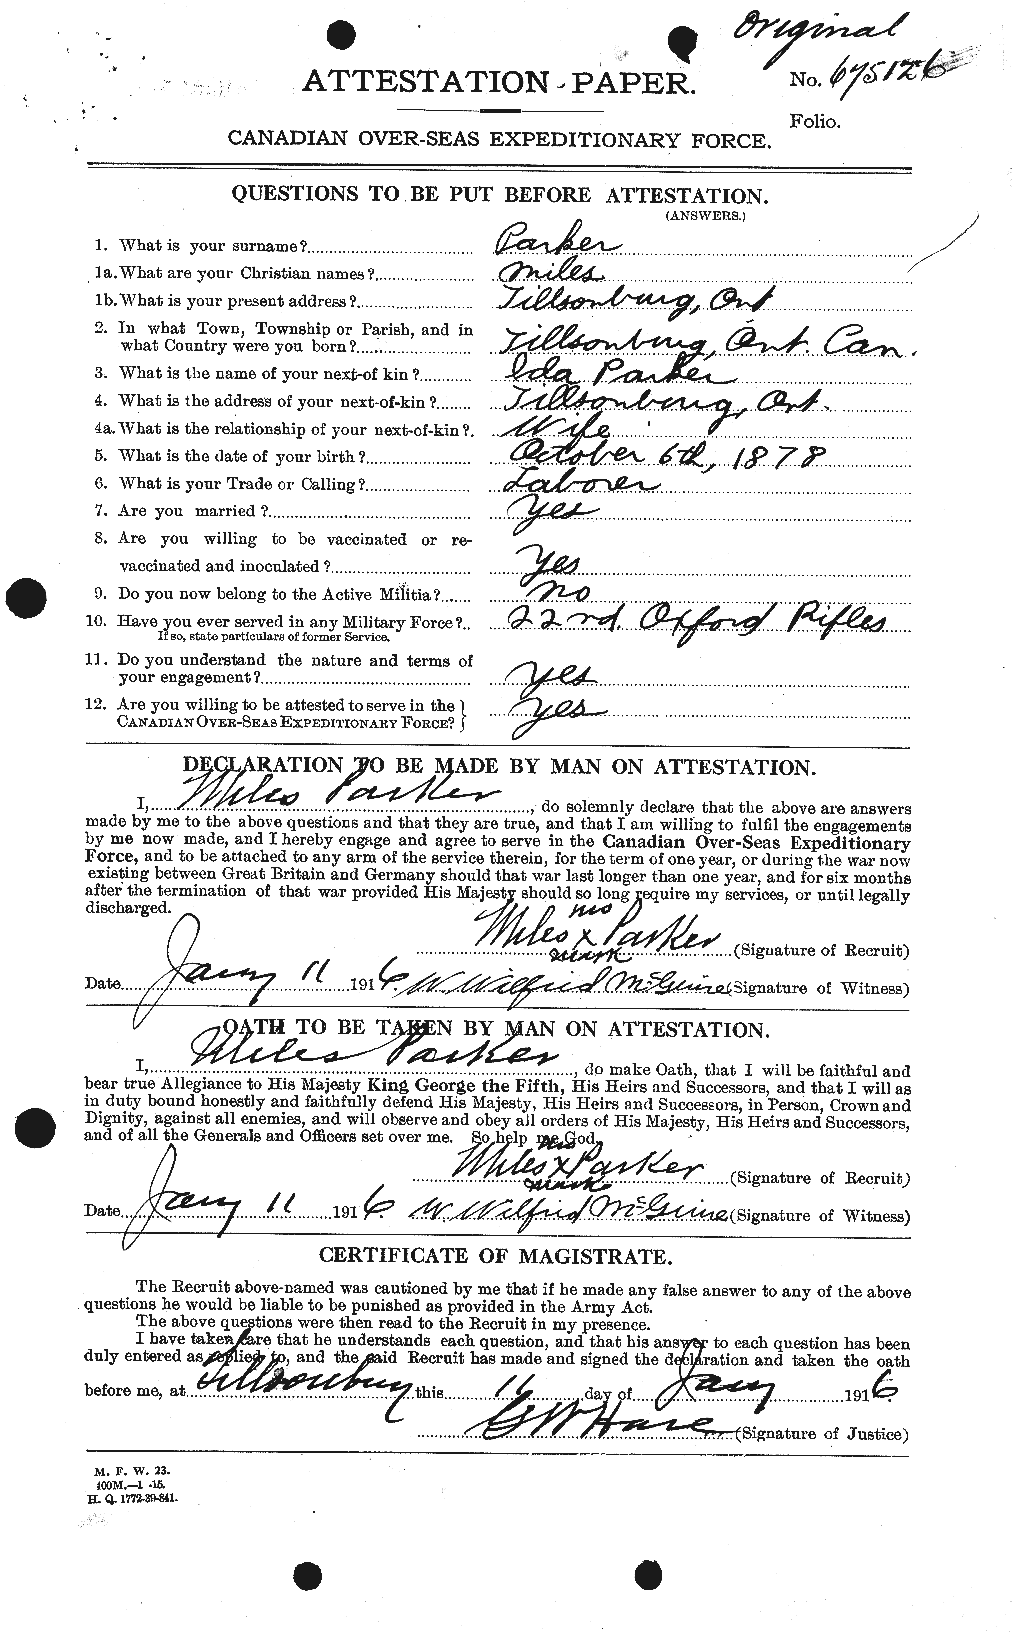 Personnel Records of the First World War - CEF 565547a